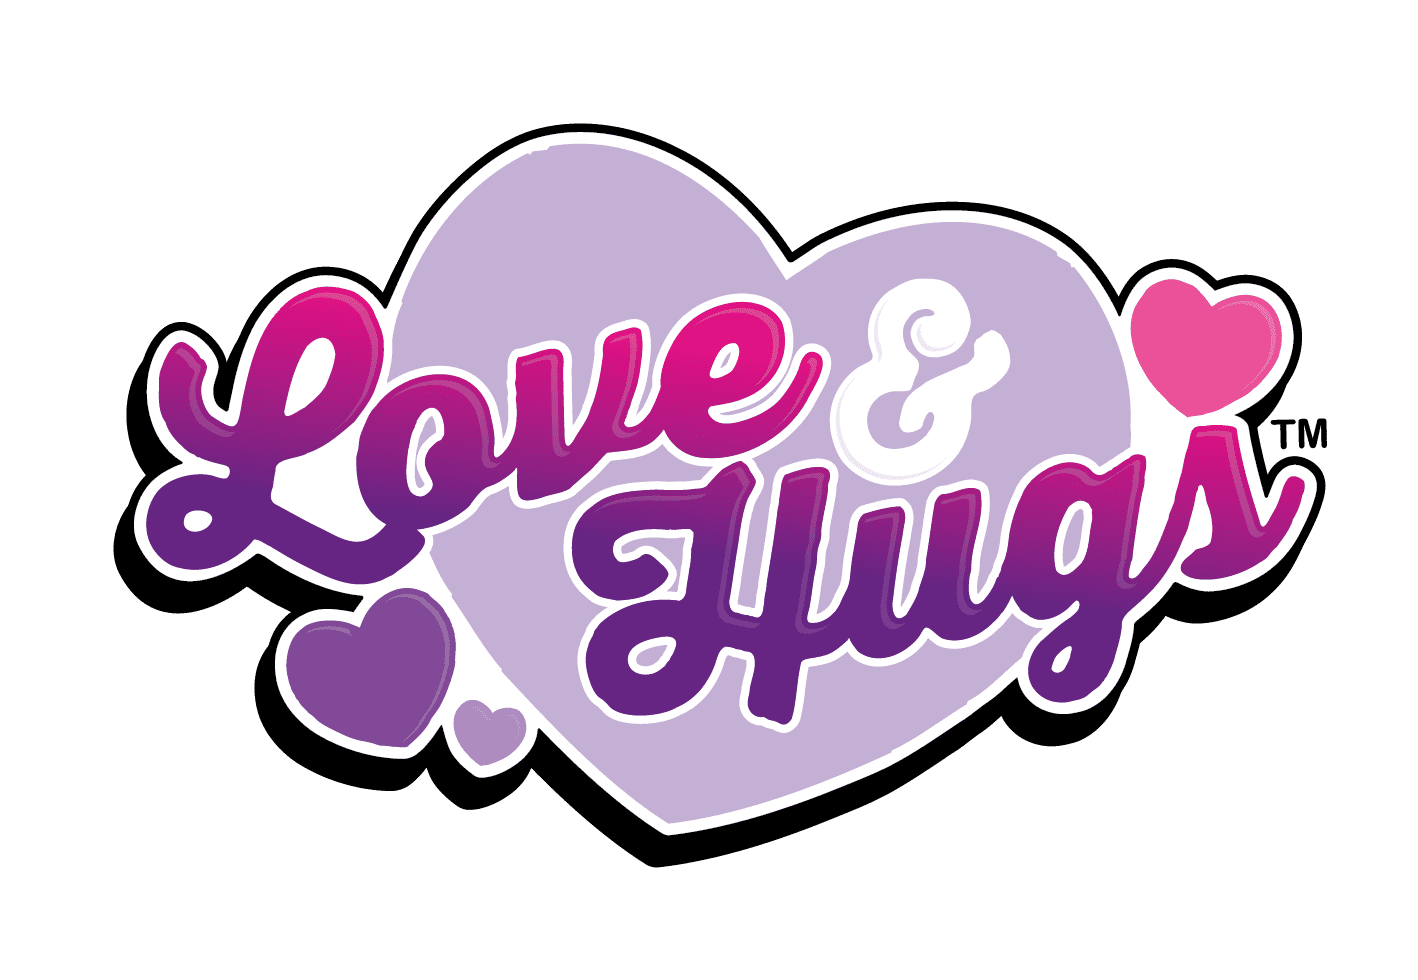 This is an image of the Love & Hugs logo.